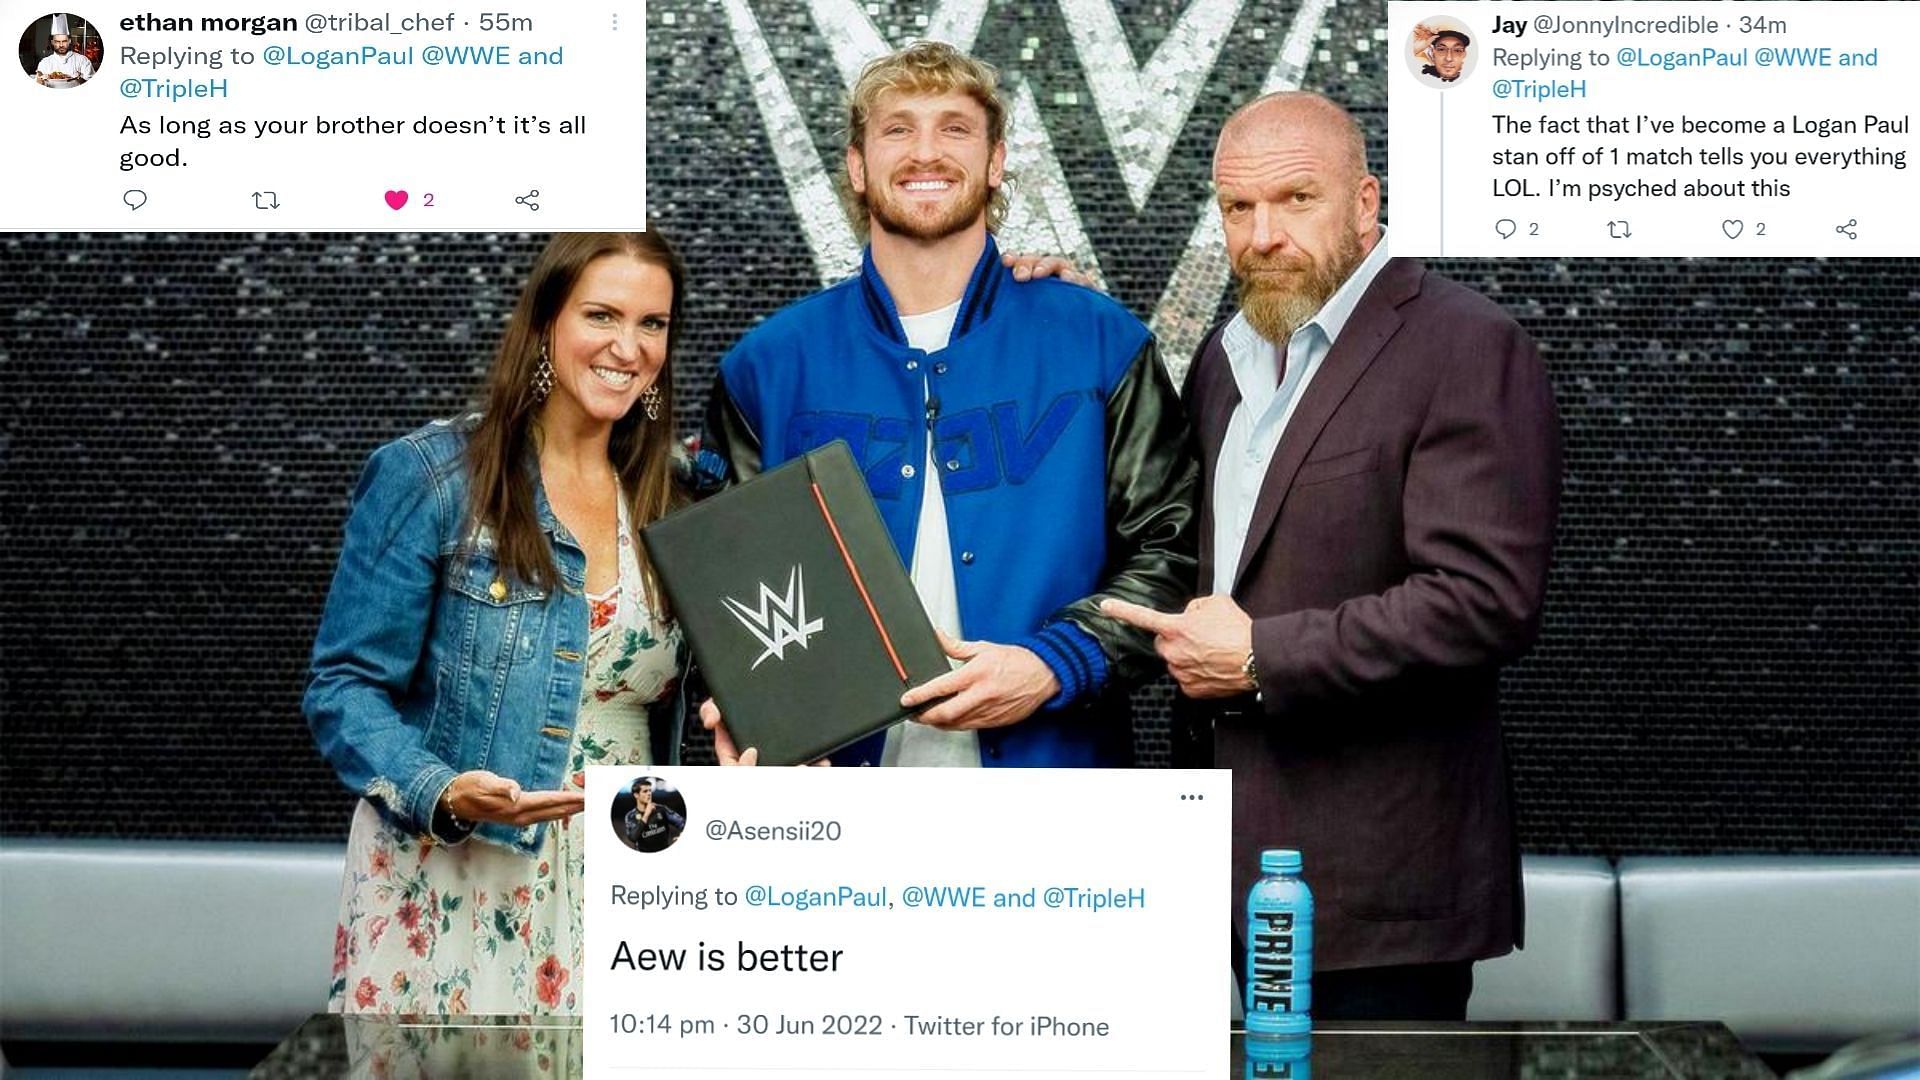 WWE has made a huge move and signed Celebrity/YouTuber, Logan Paul.